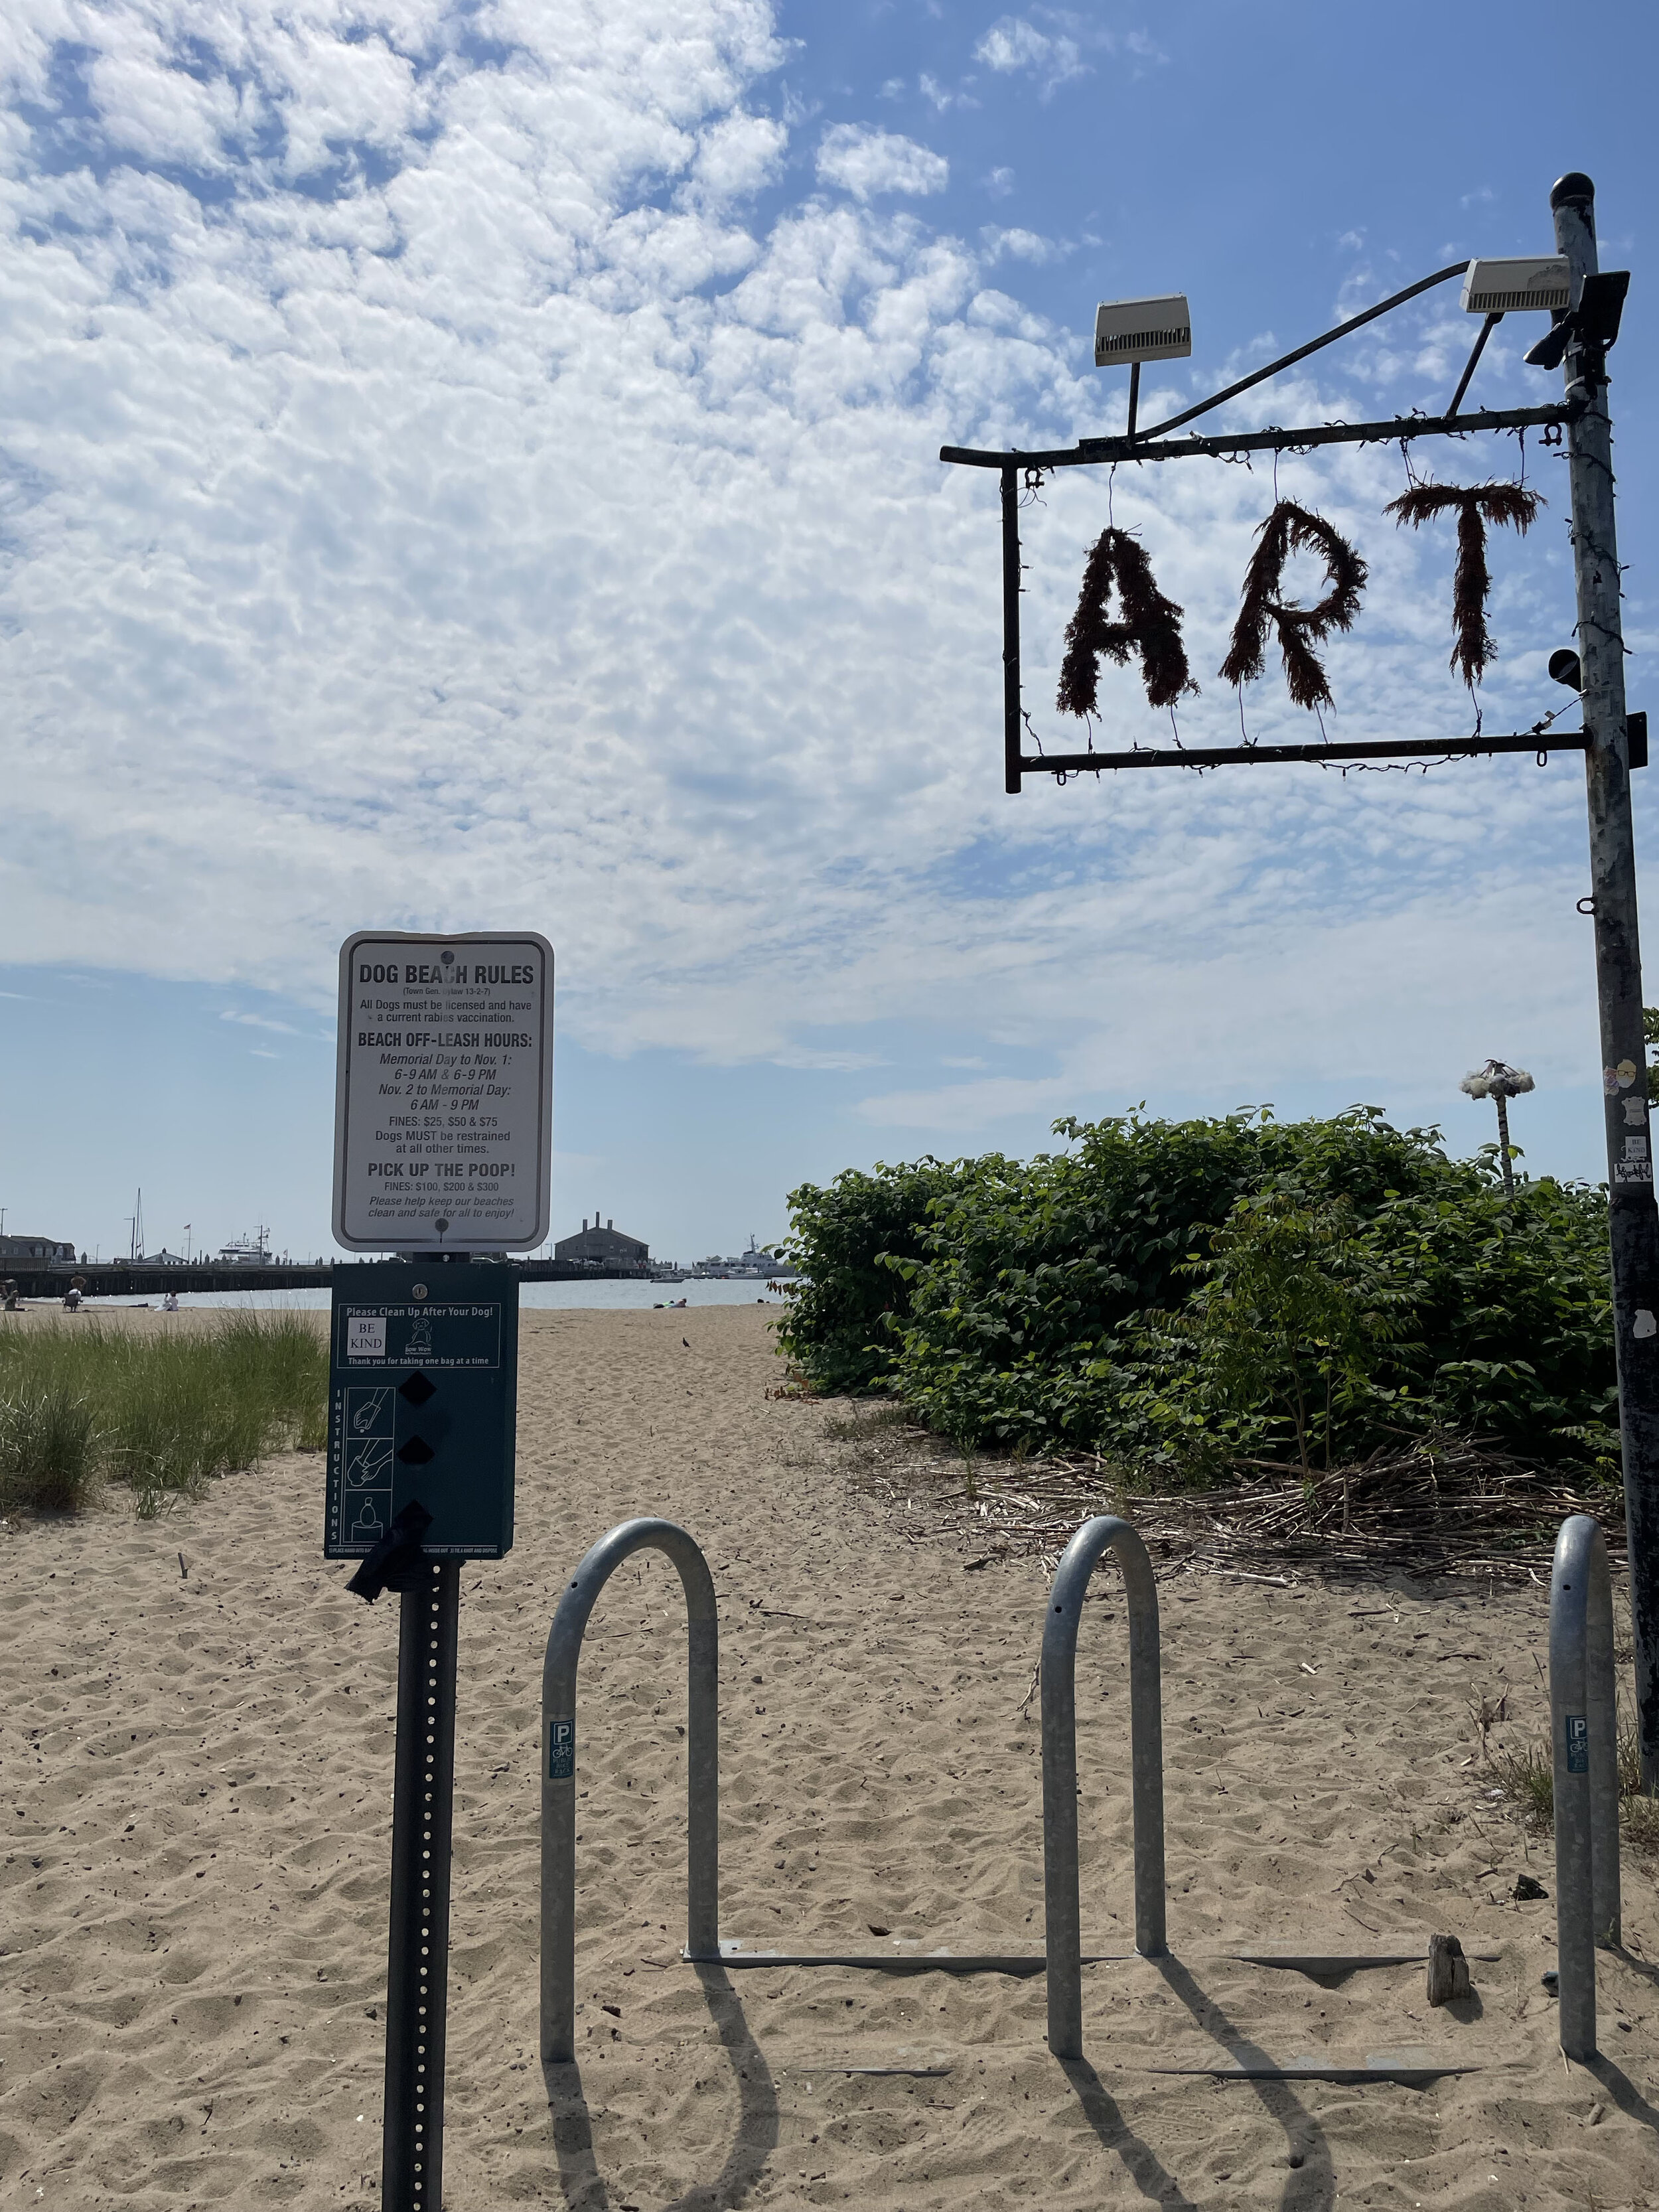 PROVINCETOWN CAPE COD SUMMER TRAVEL GUIDE